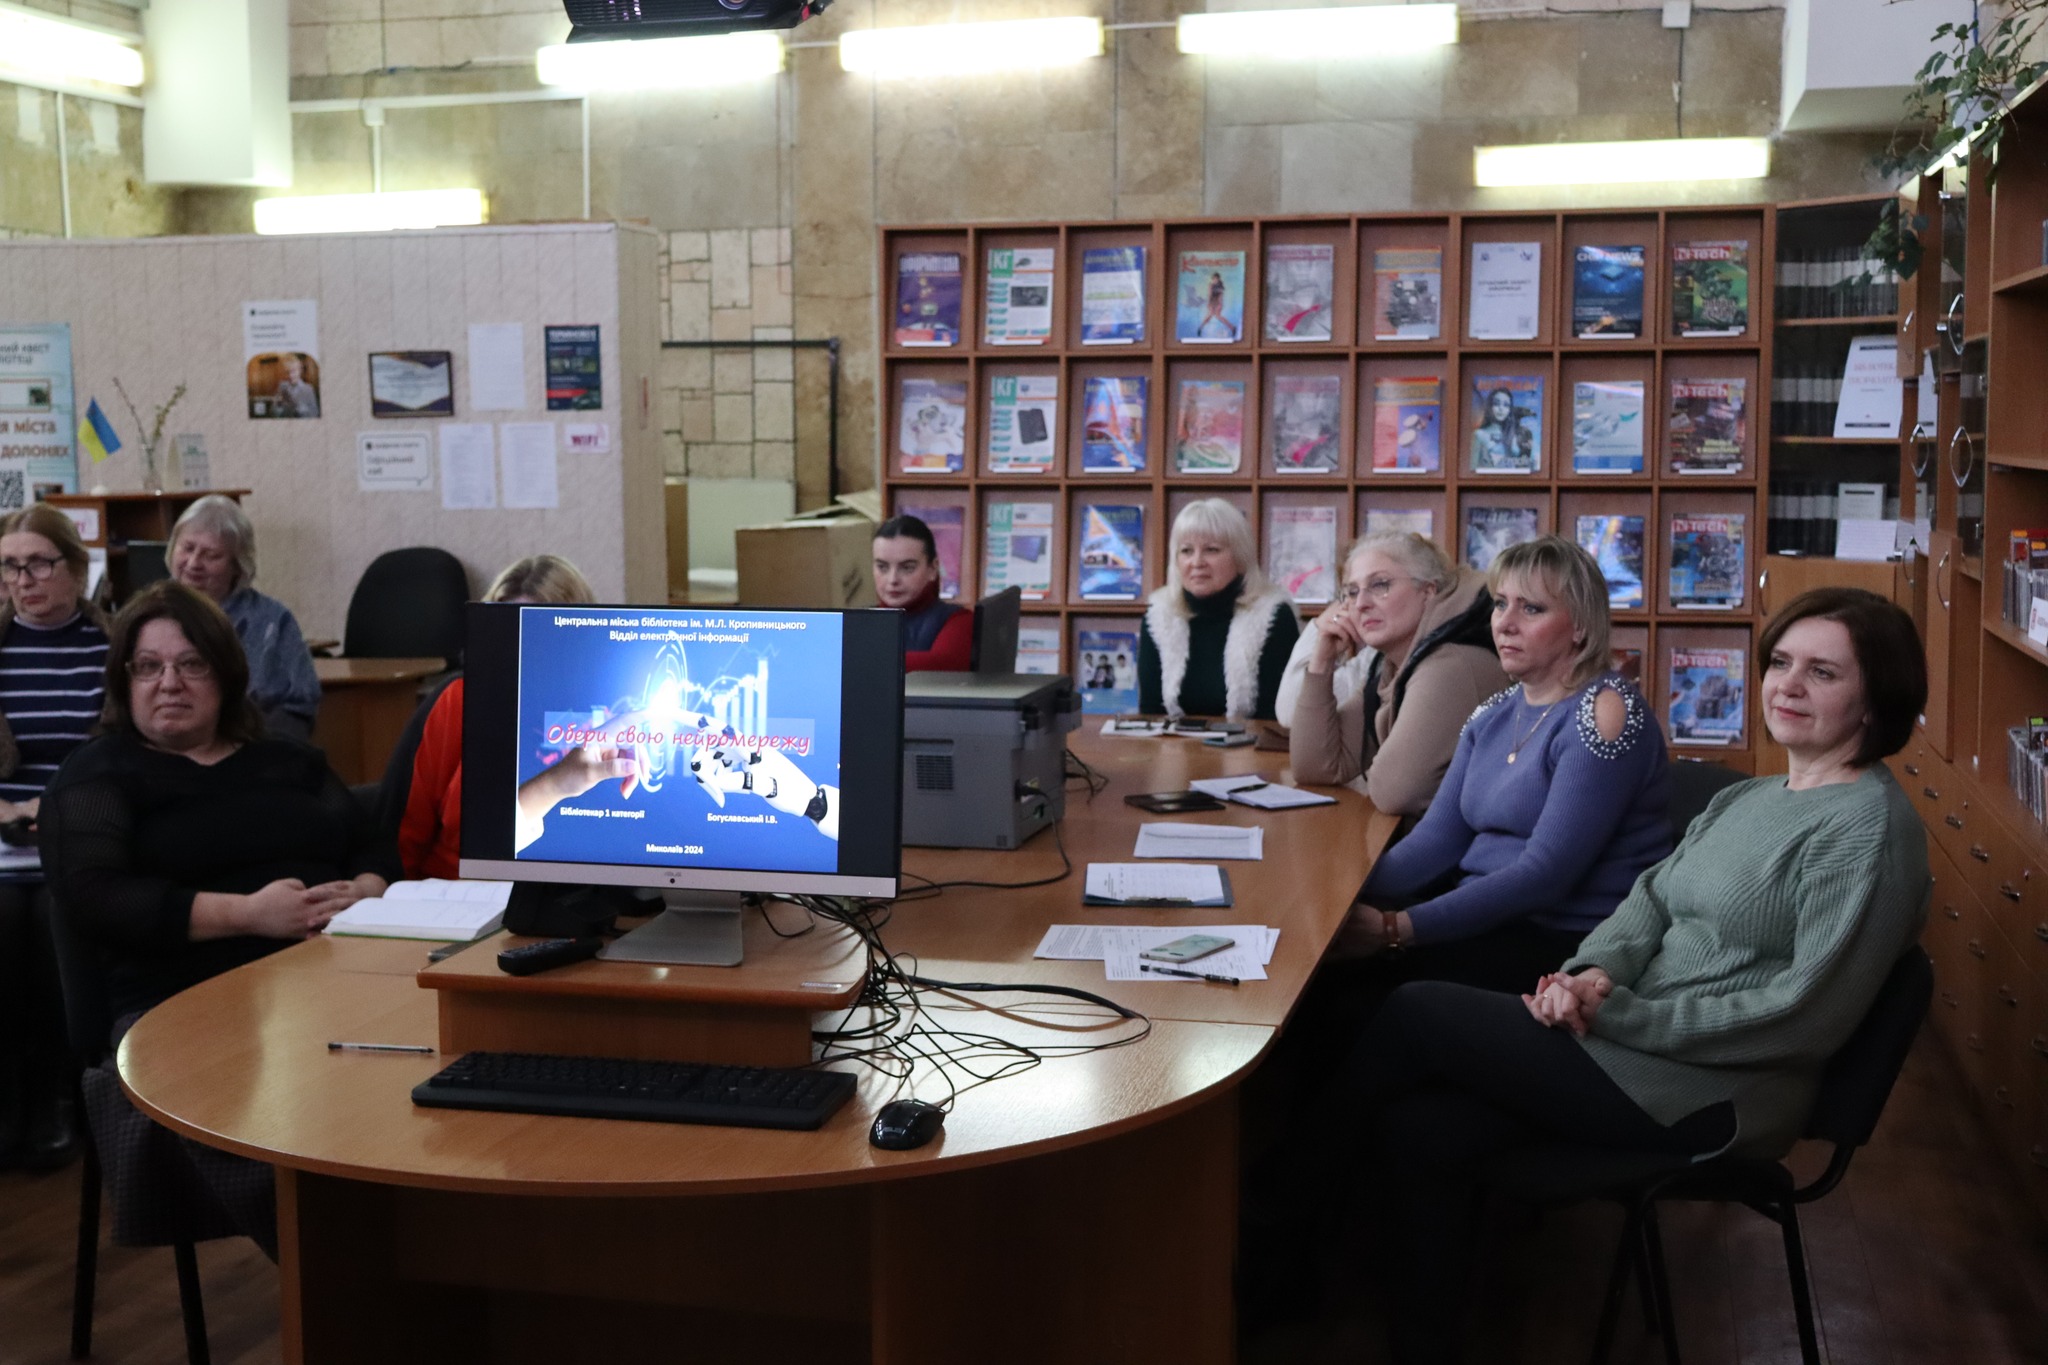 The librarians of the Electronic Information Department of the Central city library named after M.L. Kropyvnytskyi invited their colleagues to the master class on artificial intelligence